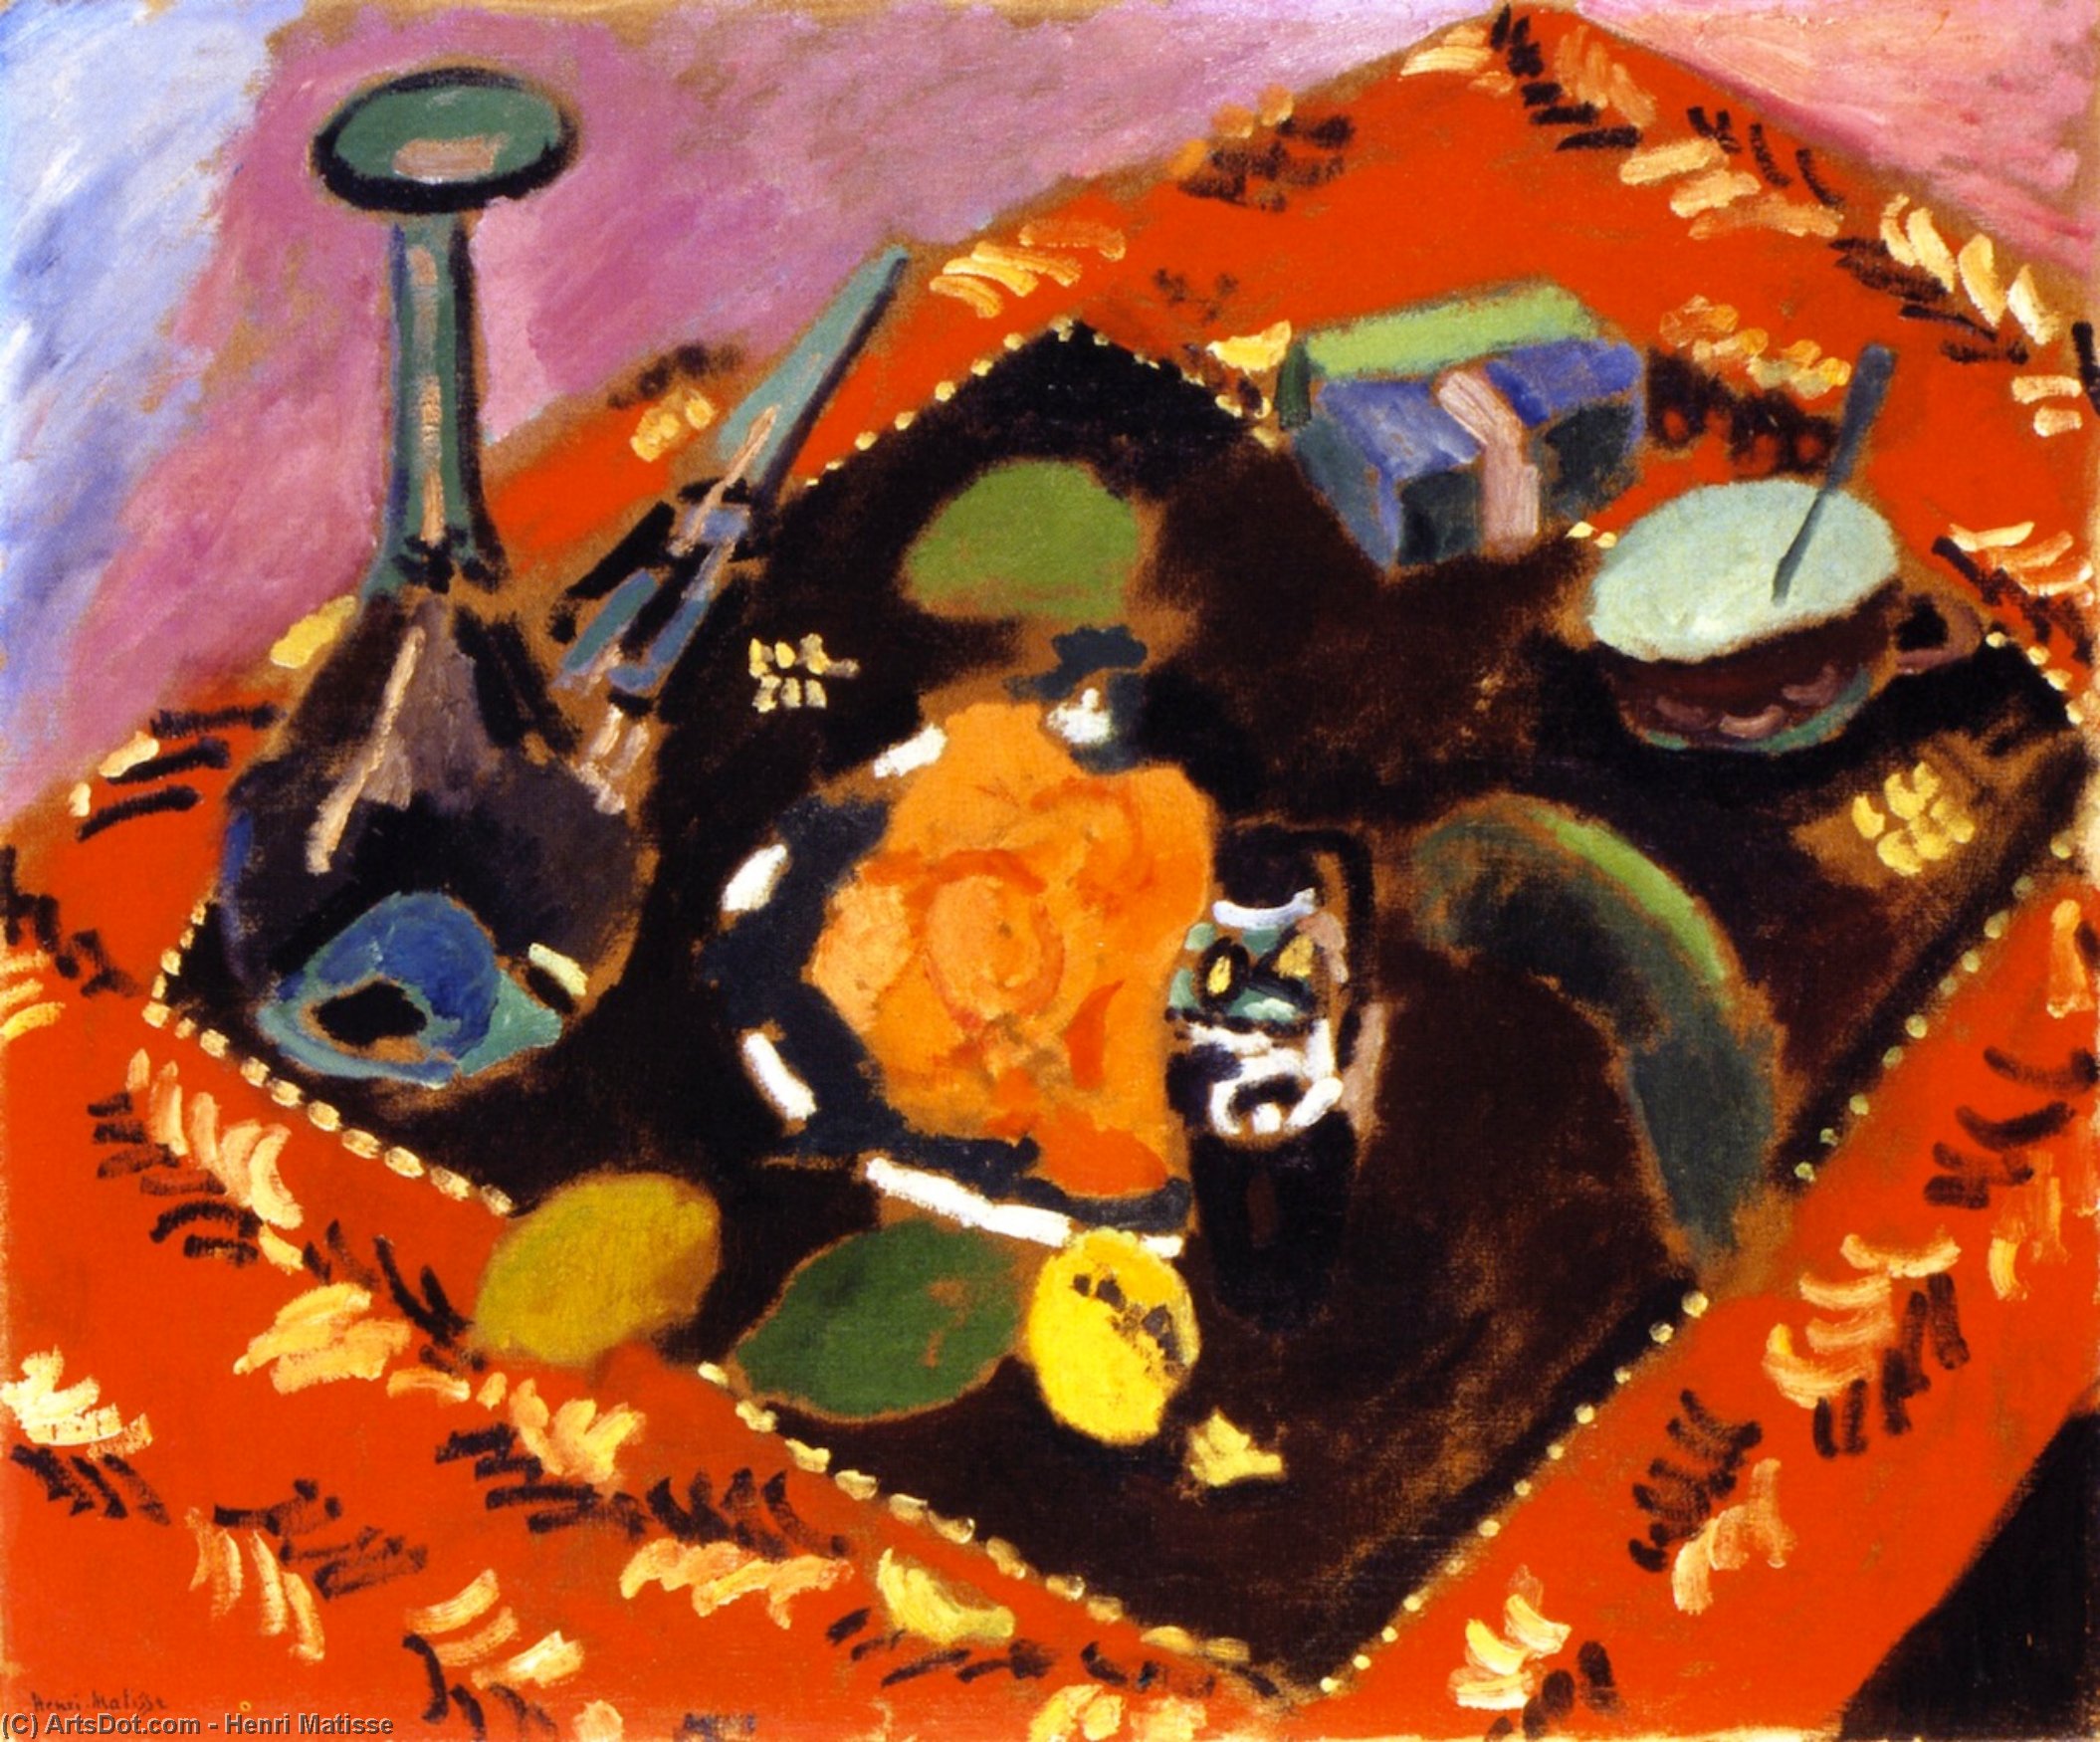 WikiOO.org - Güzel Sanatlar Ansiklopedisi - Resim, Resimler Henri Matisse - Dishes and Fruit on a Red and Black Carpet (also known as Le Tapis Rouge)